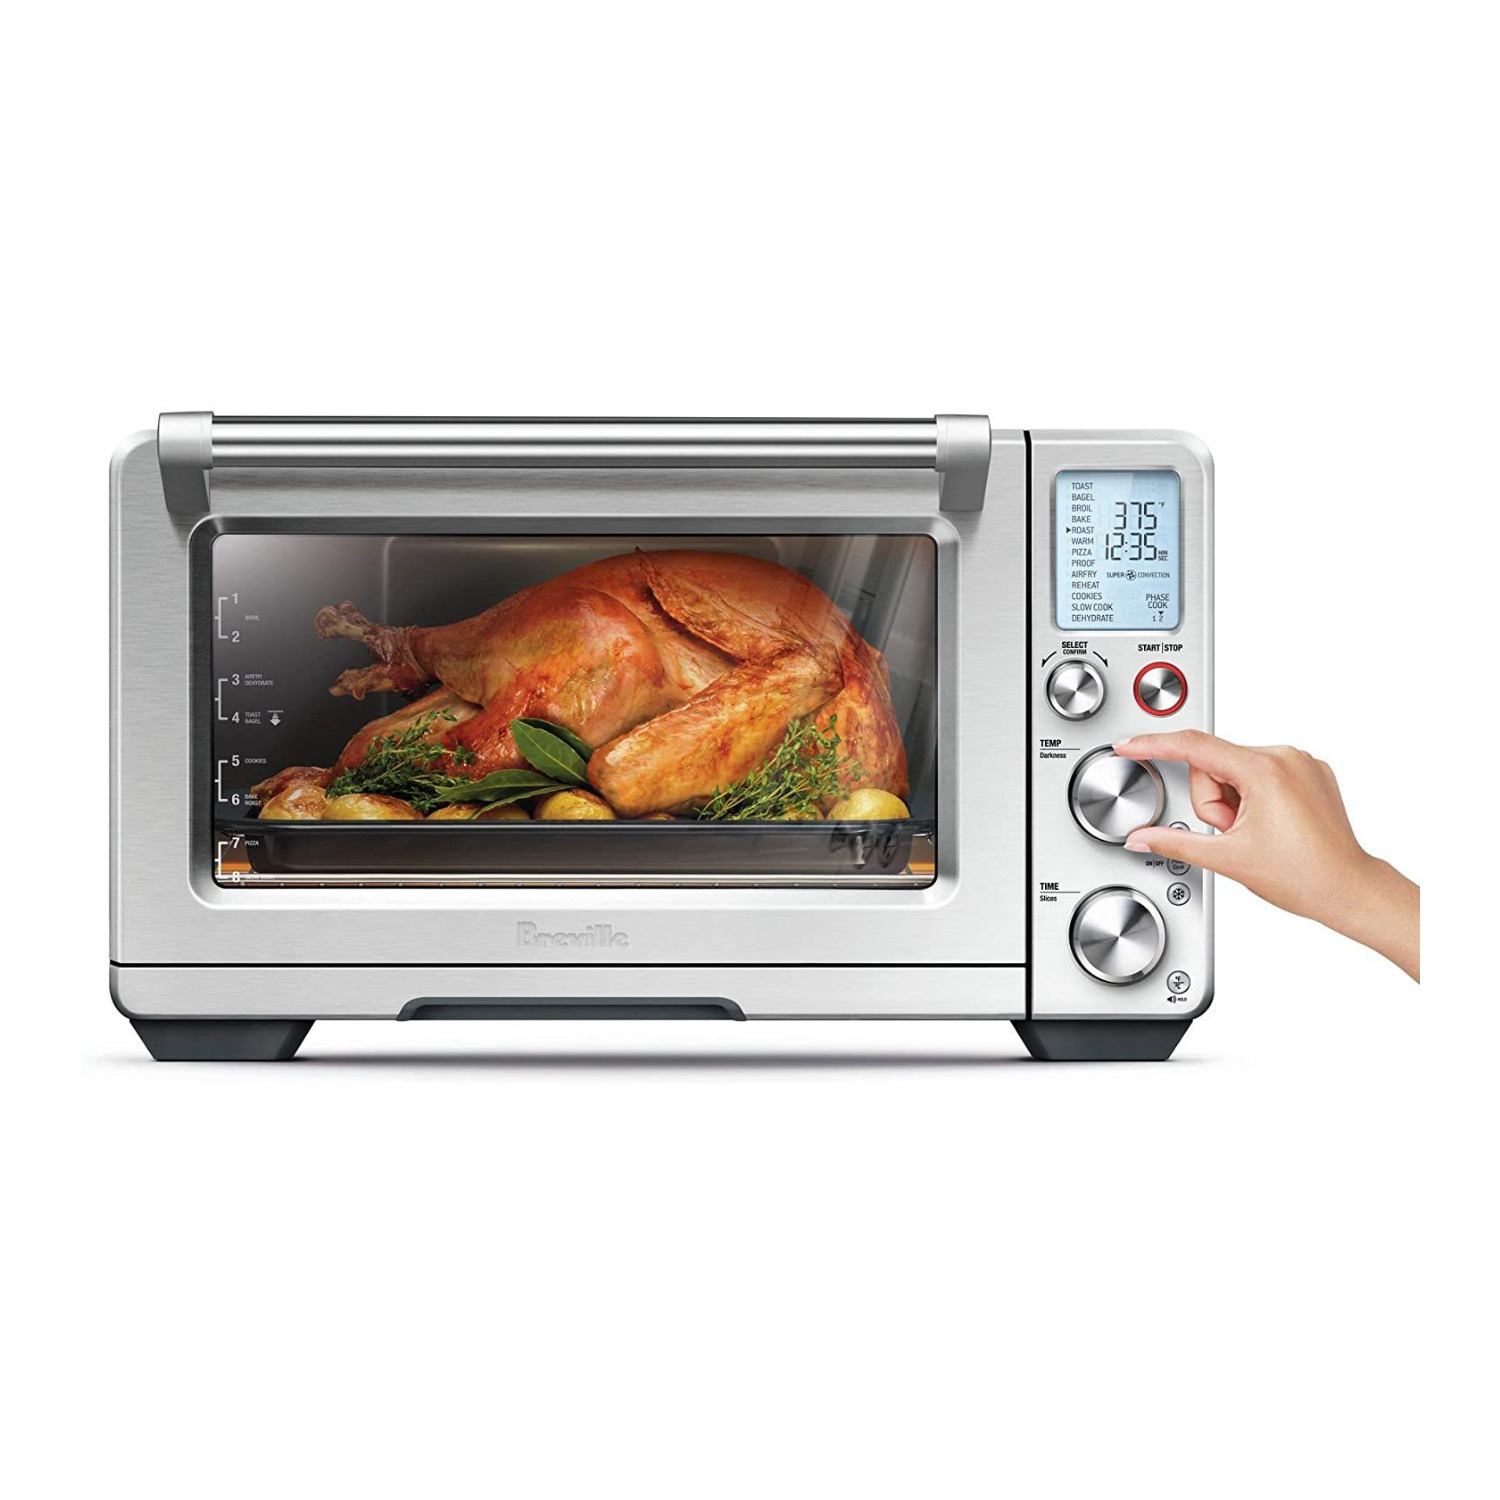 Breville BOV900BSS Convection and Air Fry Smart Oven Air - image 3 of 3